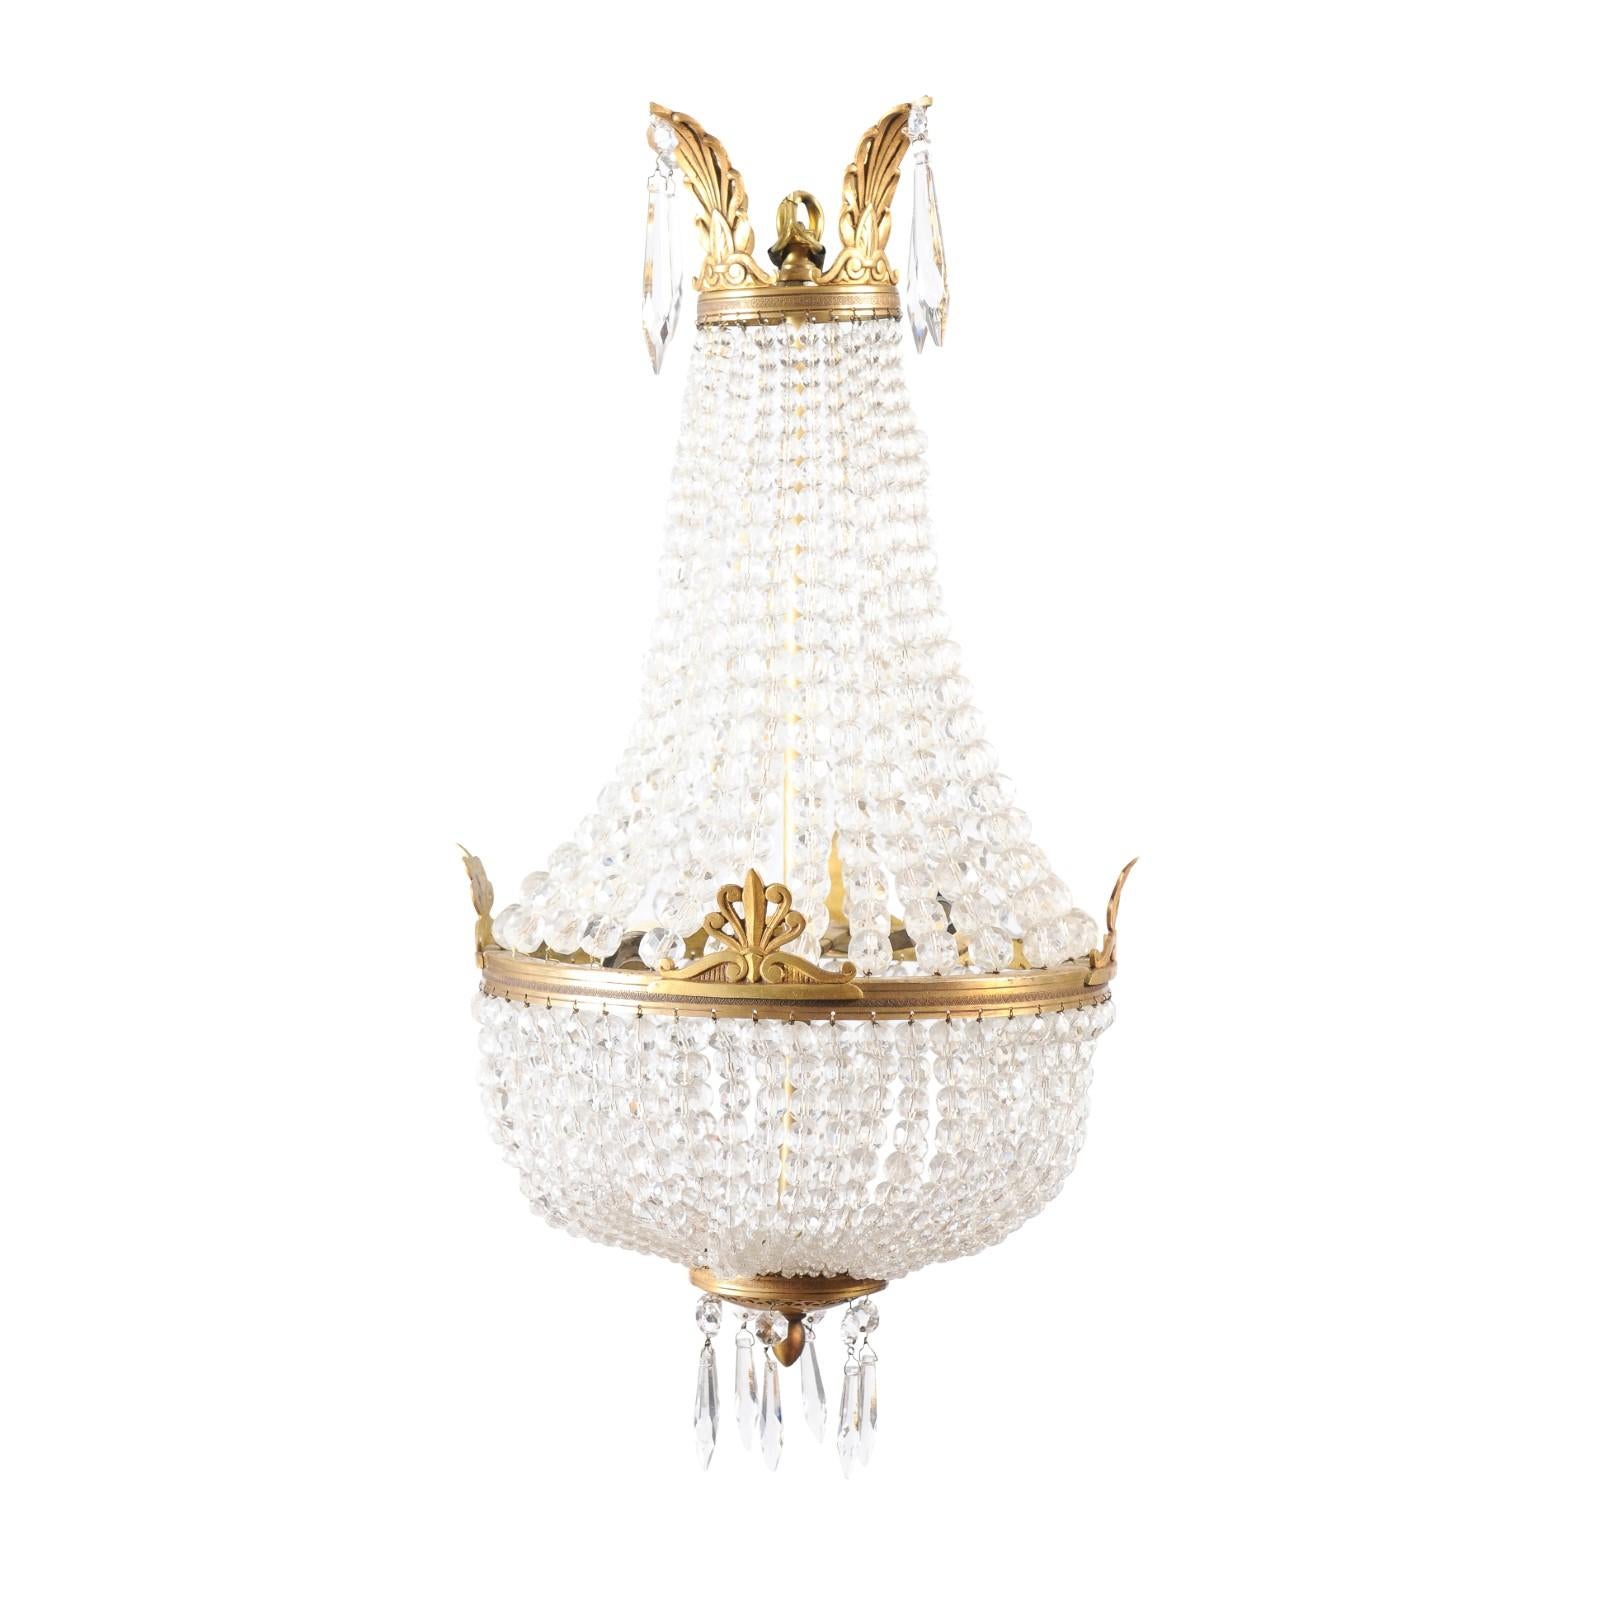 A French Napoléon III period montgolfière two lights crystal chandelier from the mid 19th century with brass foliage, wired for the USA. Experience the allure of French artistry with this mid 19th century Napoléon III period Montgolfière chandelier.